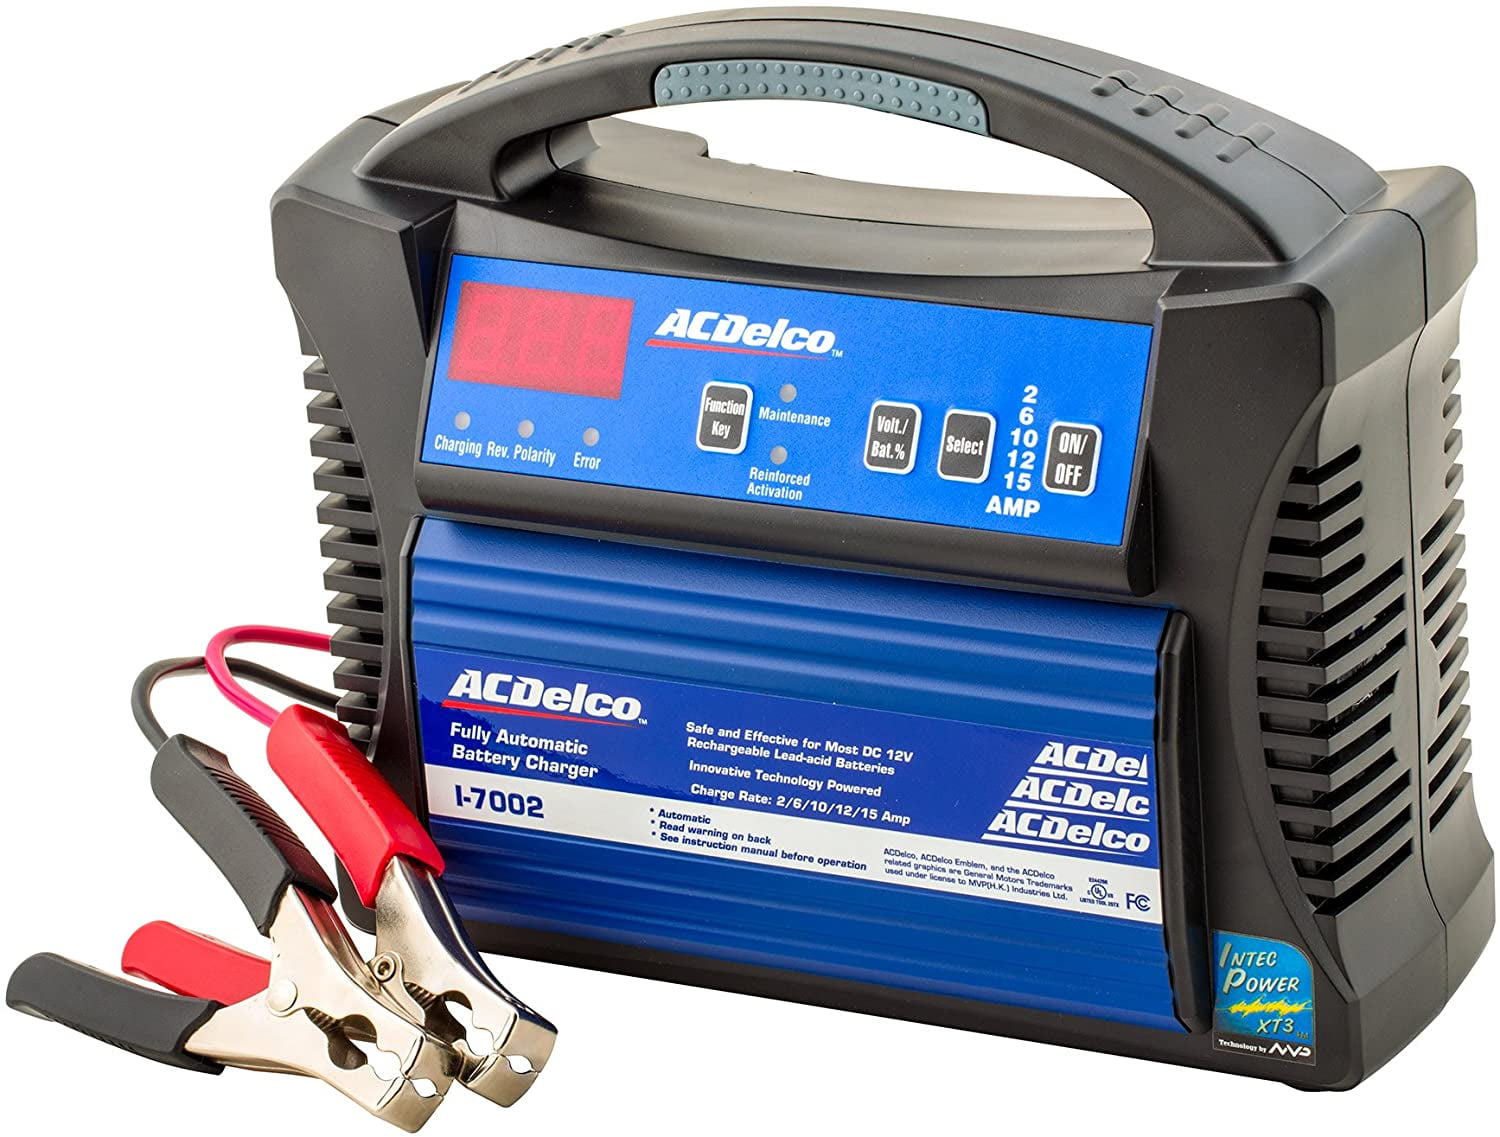 15 Amp Automatic Battery Charger